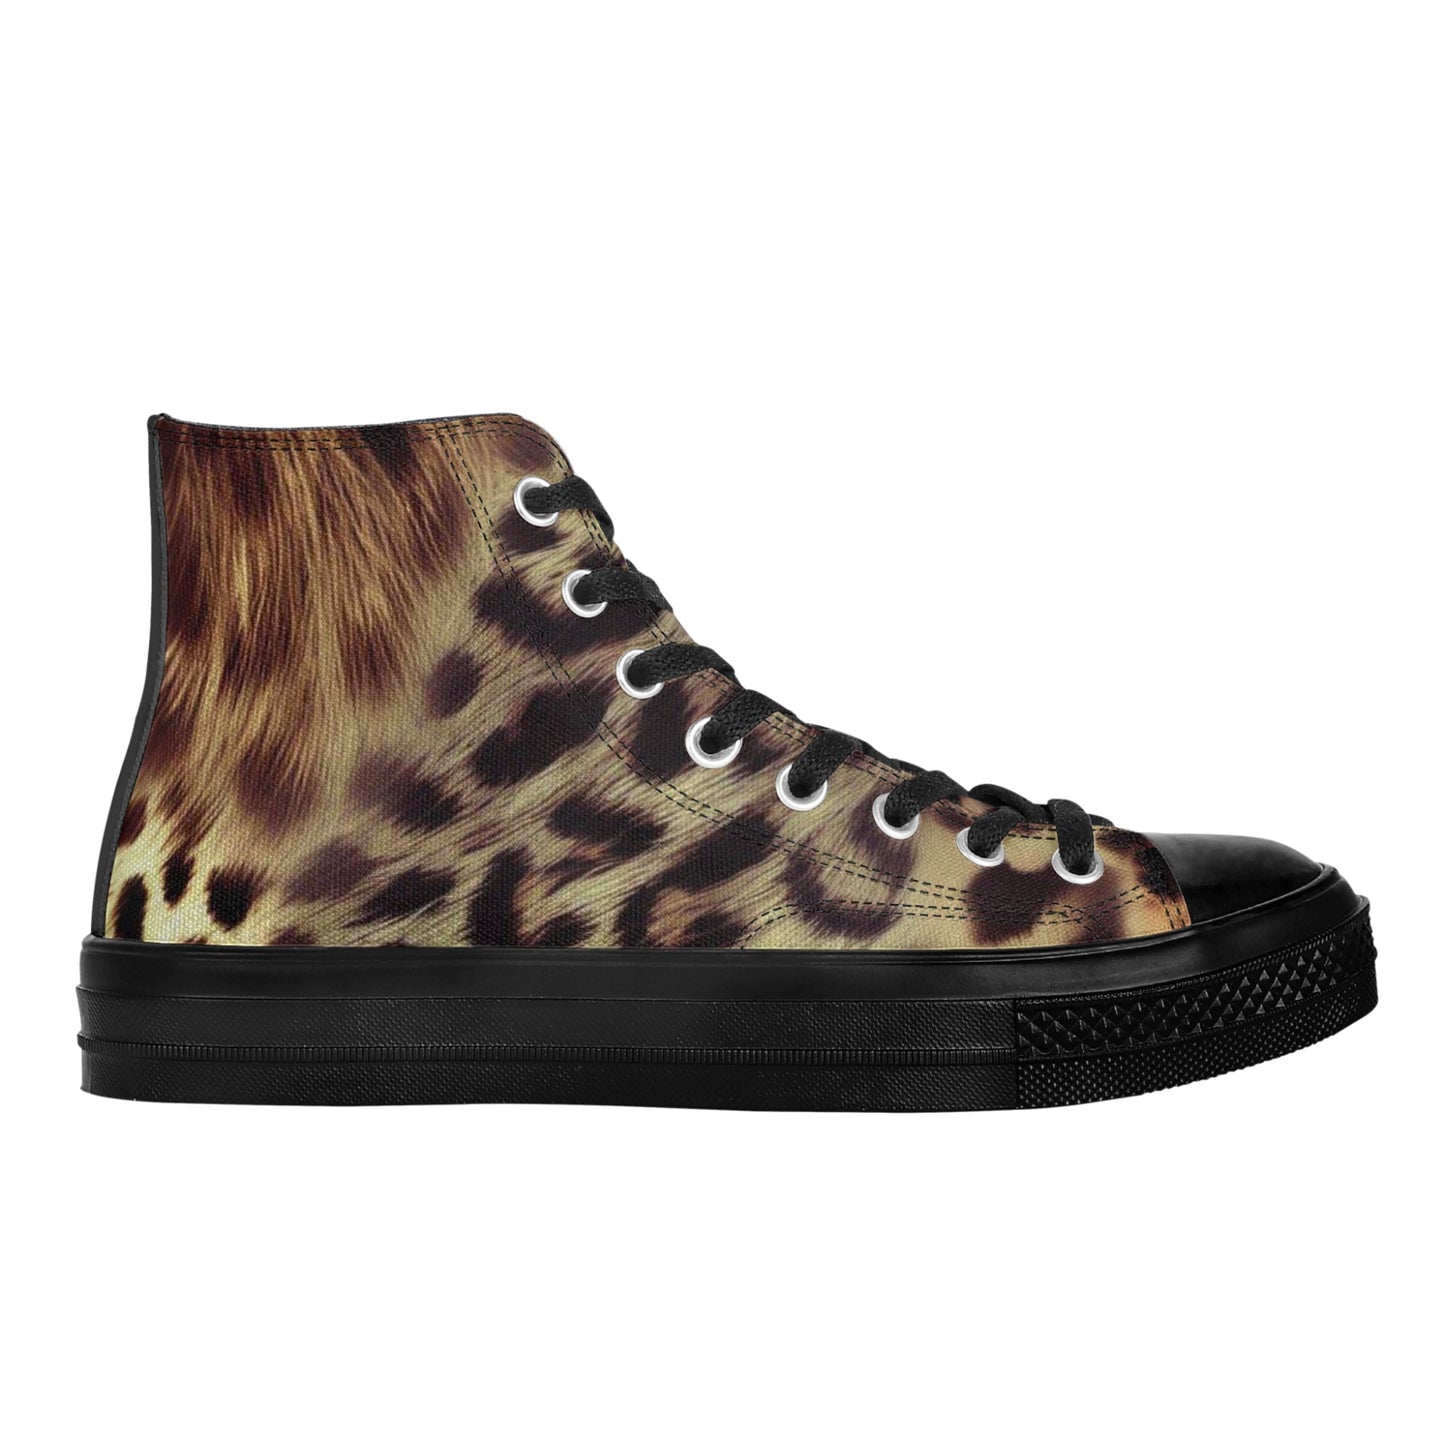 Wild Style: Canvas Shoes Featuring Striking Leopard Print